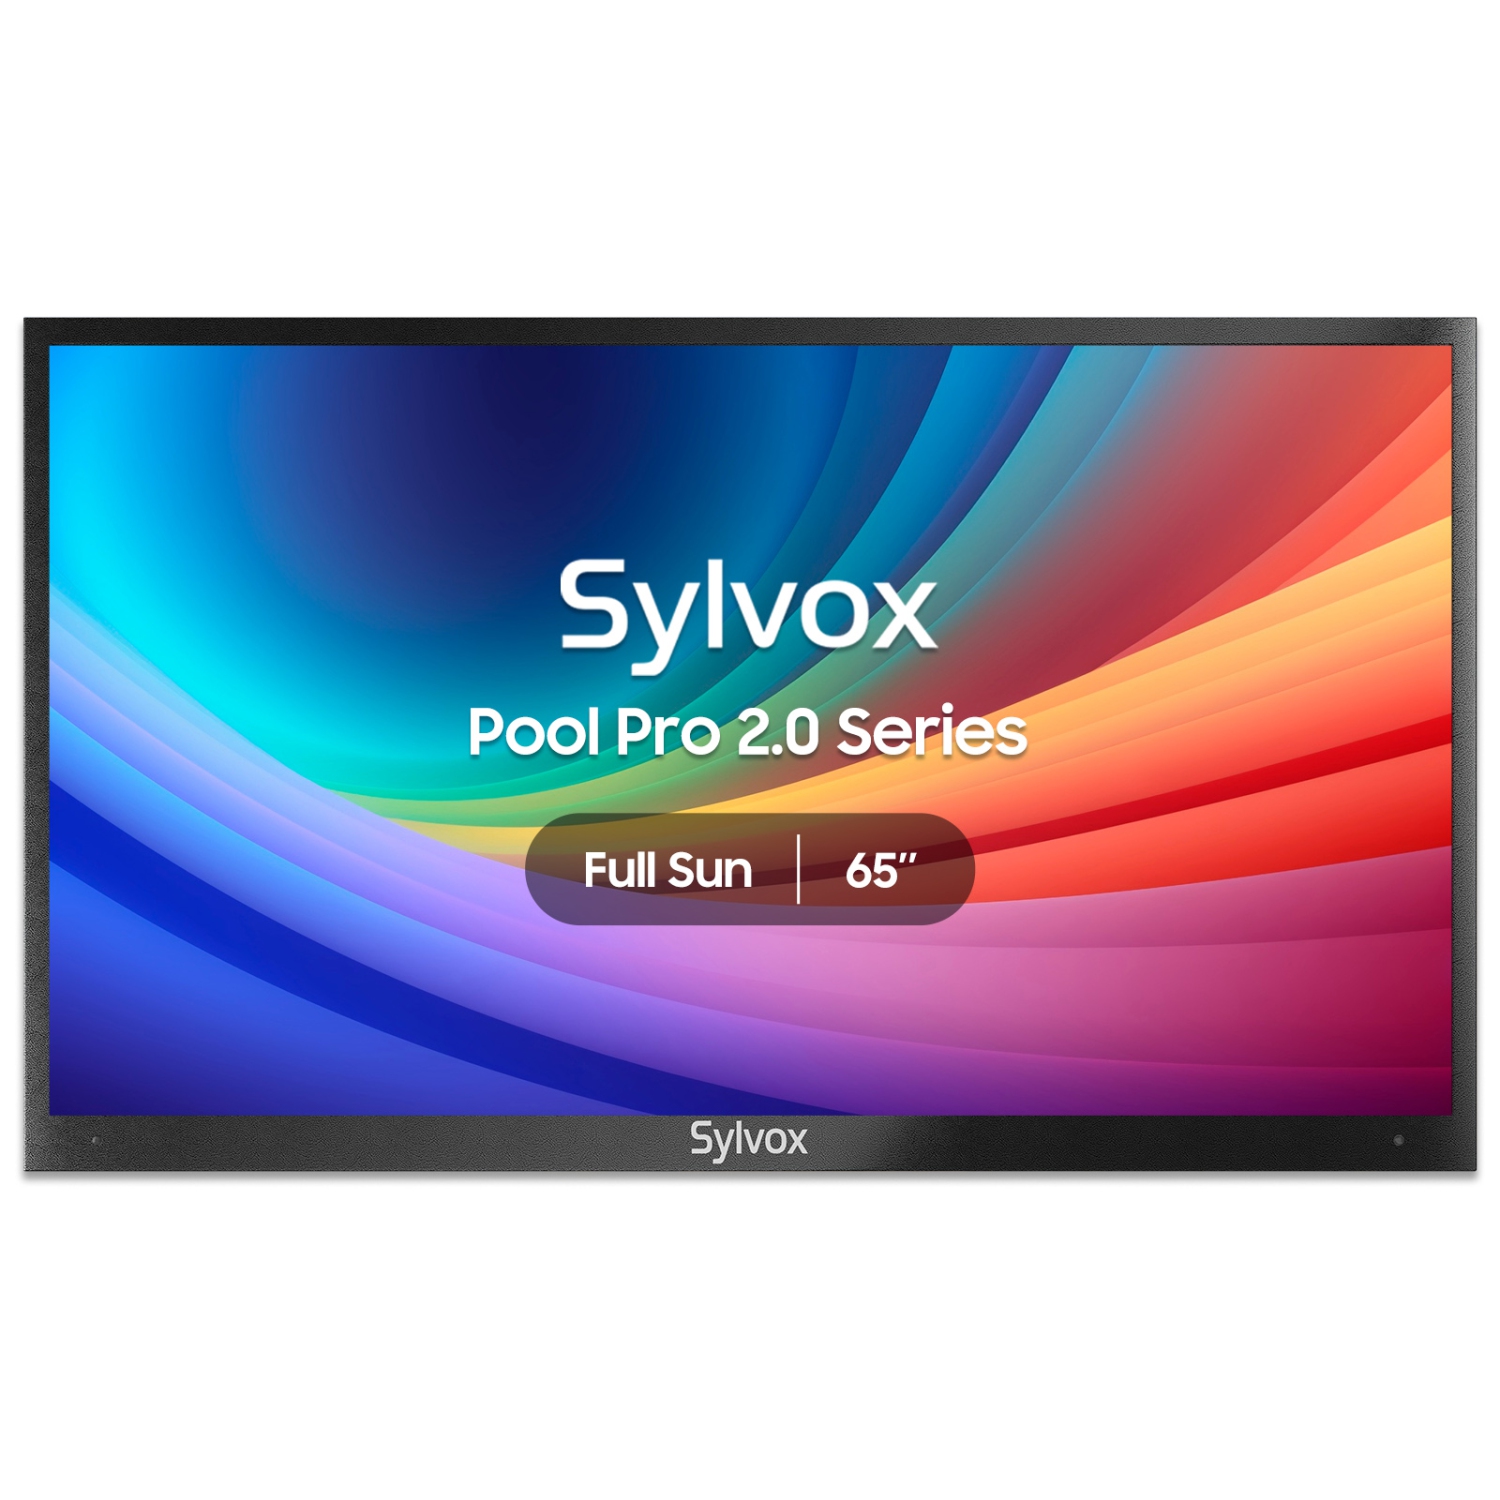 SYLVOX Outdoor TV, 65" Full Sun Smart Outdoor TV, IP55 Waterproof, Voice Remote, 2000nits Weatherproof Television, Google Assistant Chromecast(Pool Pro 2.0)